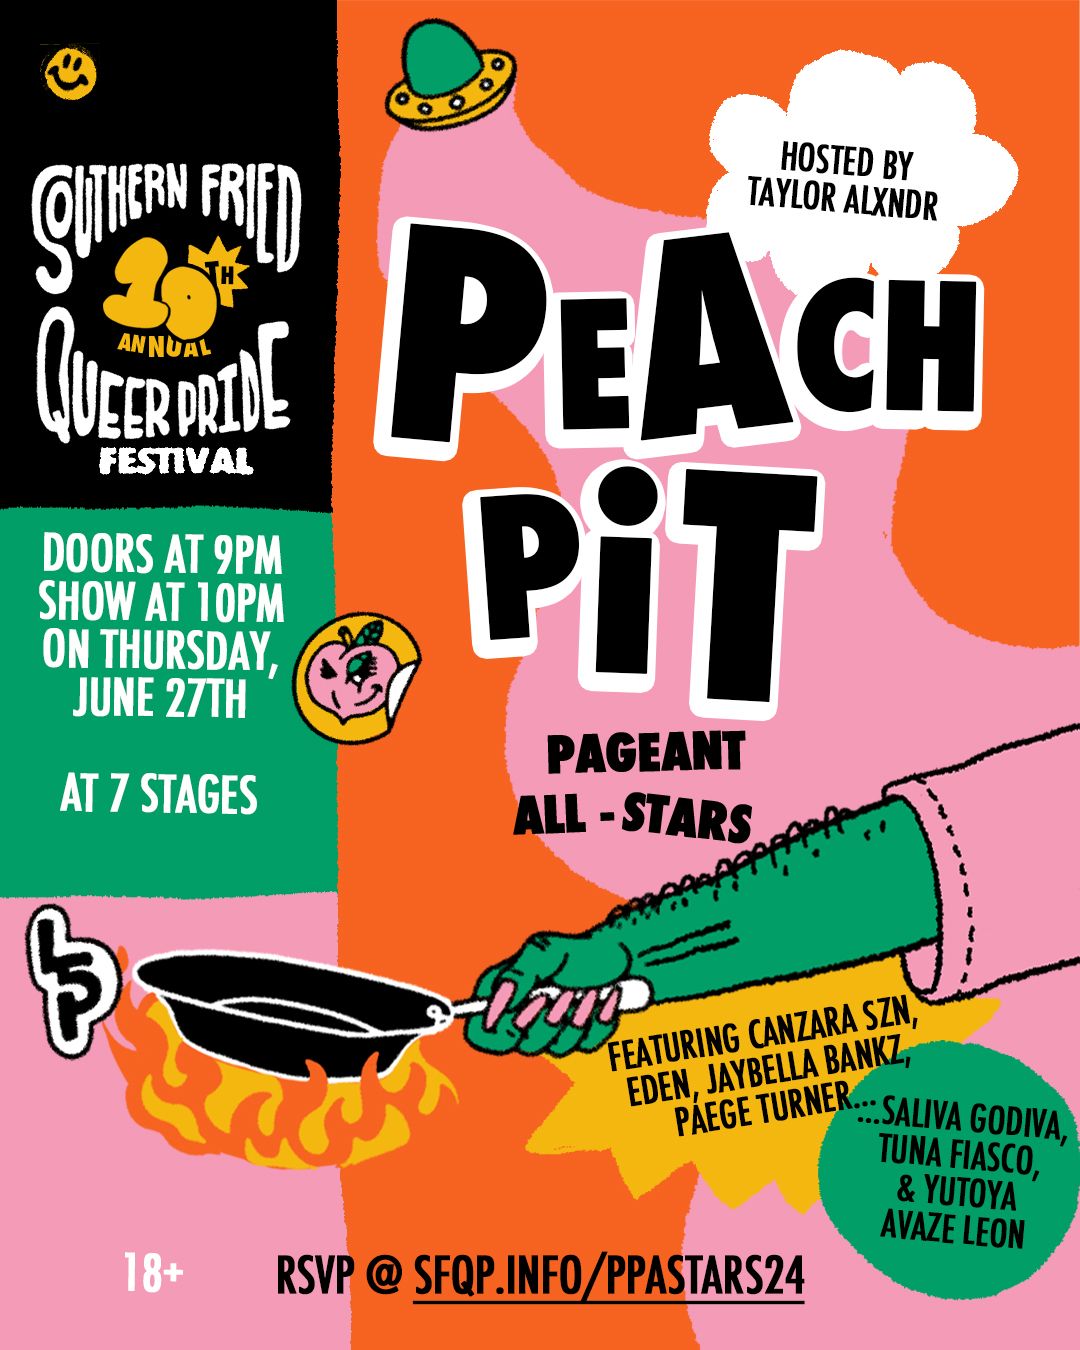 PEACH PIT PAGEANT All-Stars